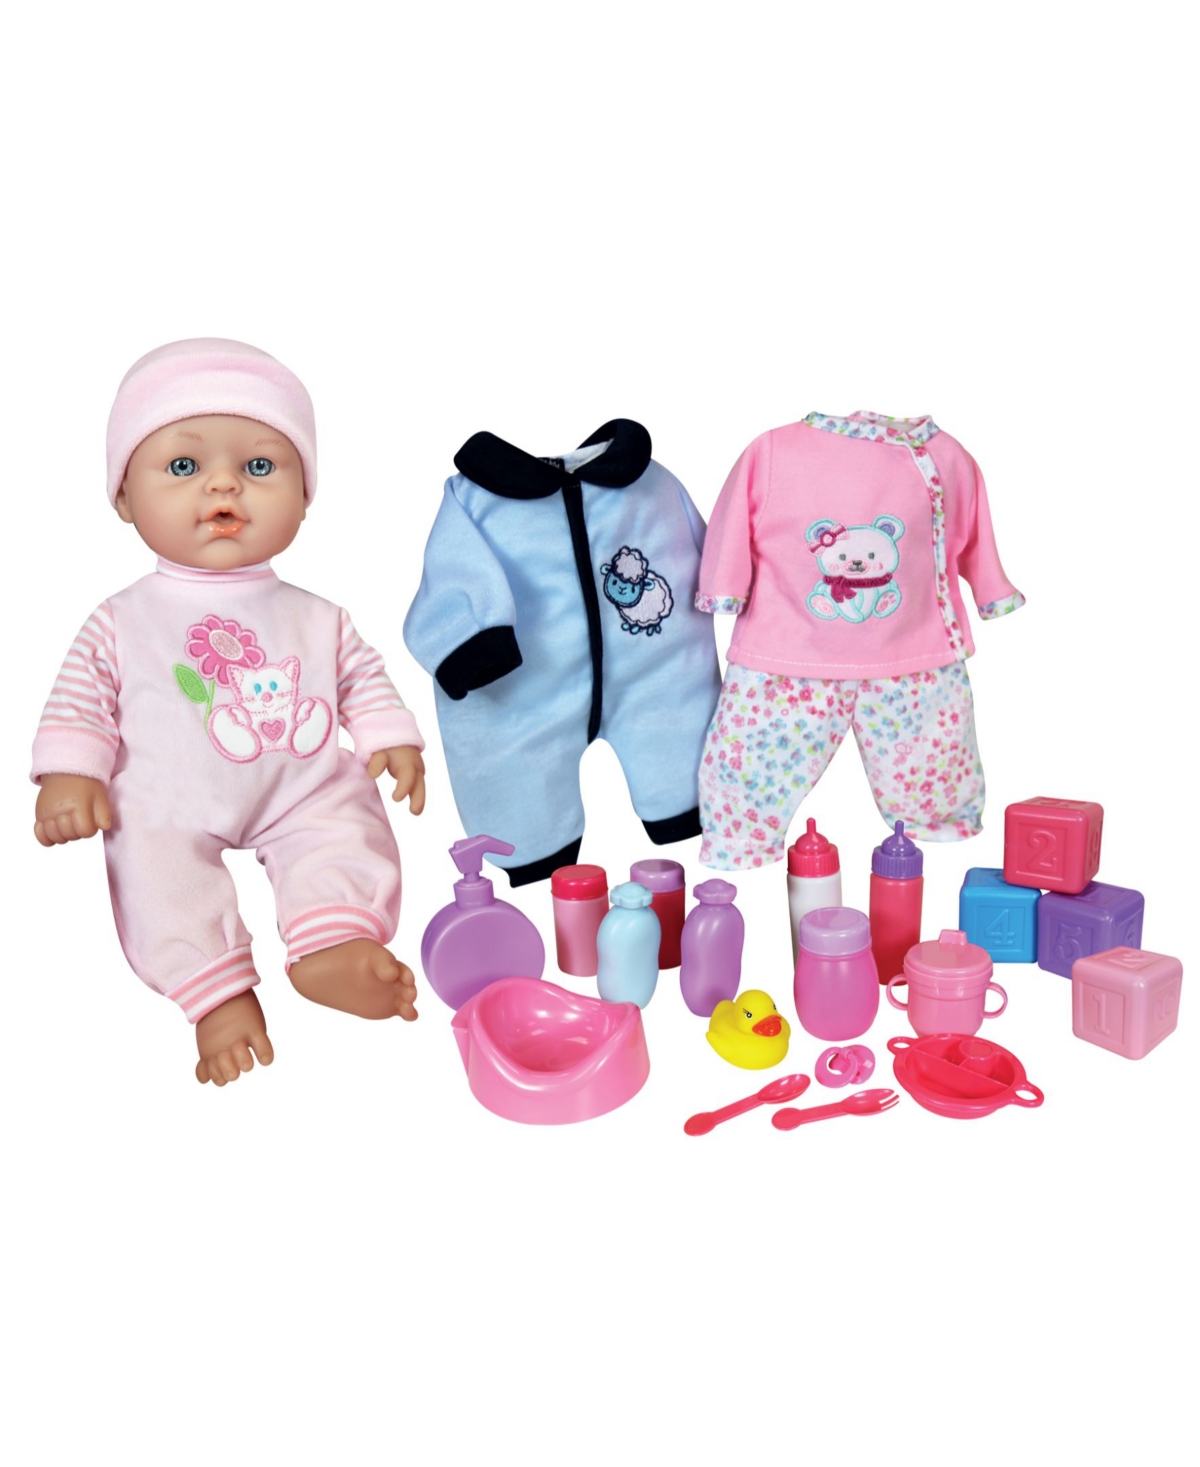 Lissi Dolls Baby Doll With Accessories Extra Outfits In Multi